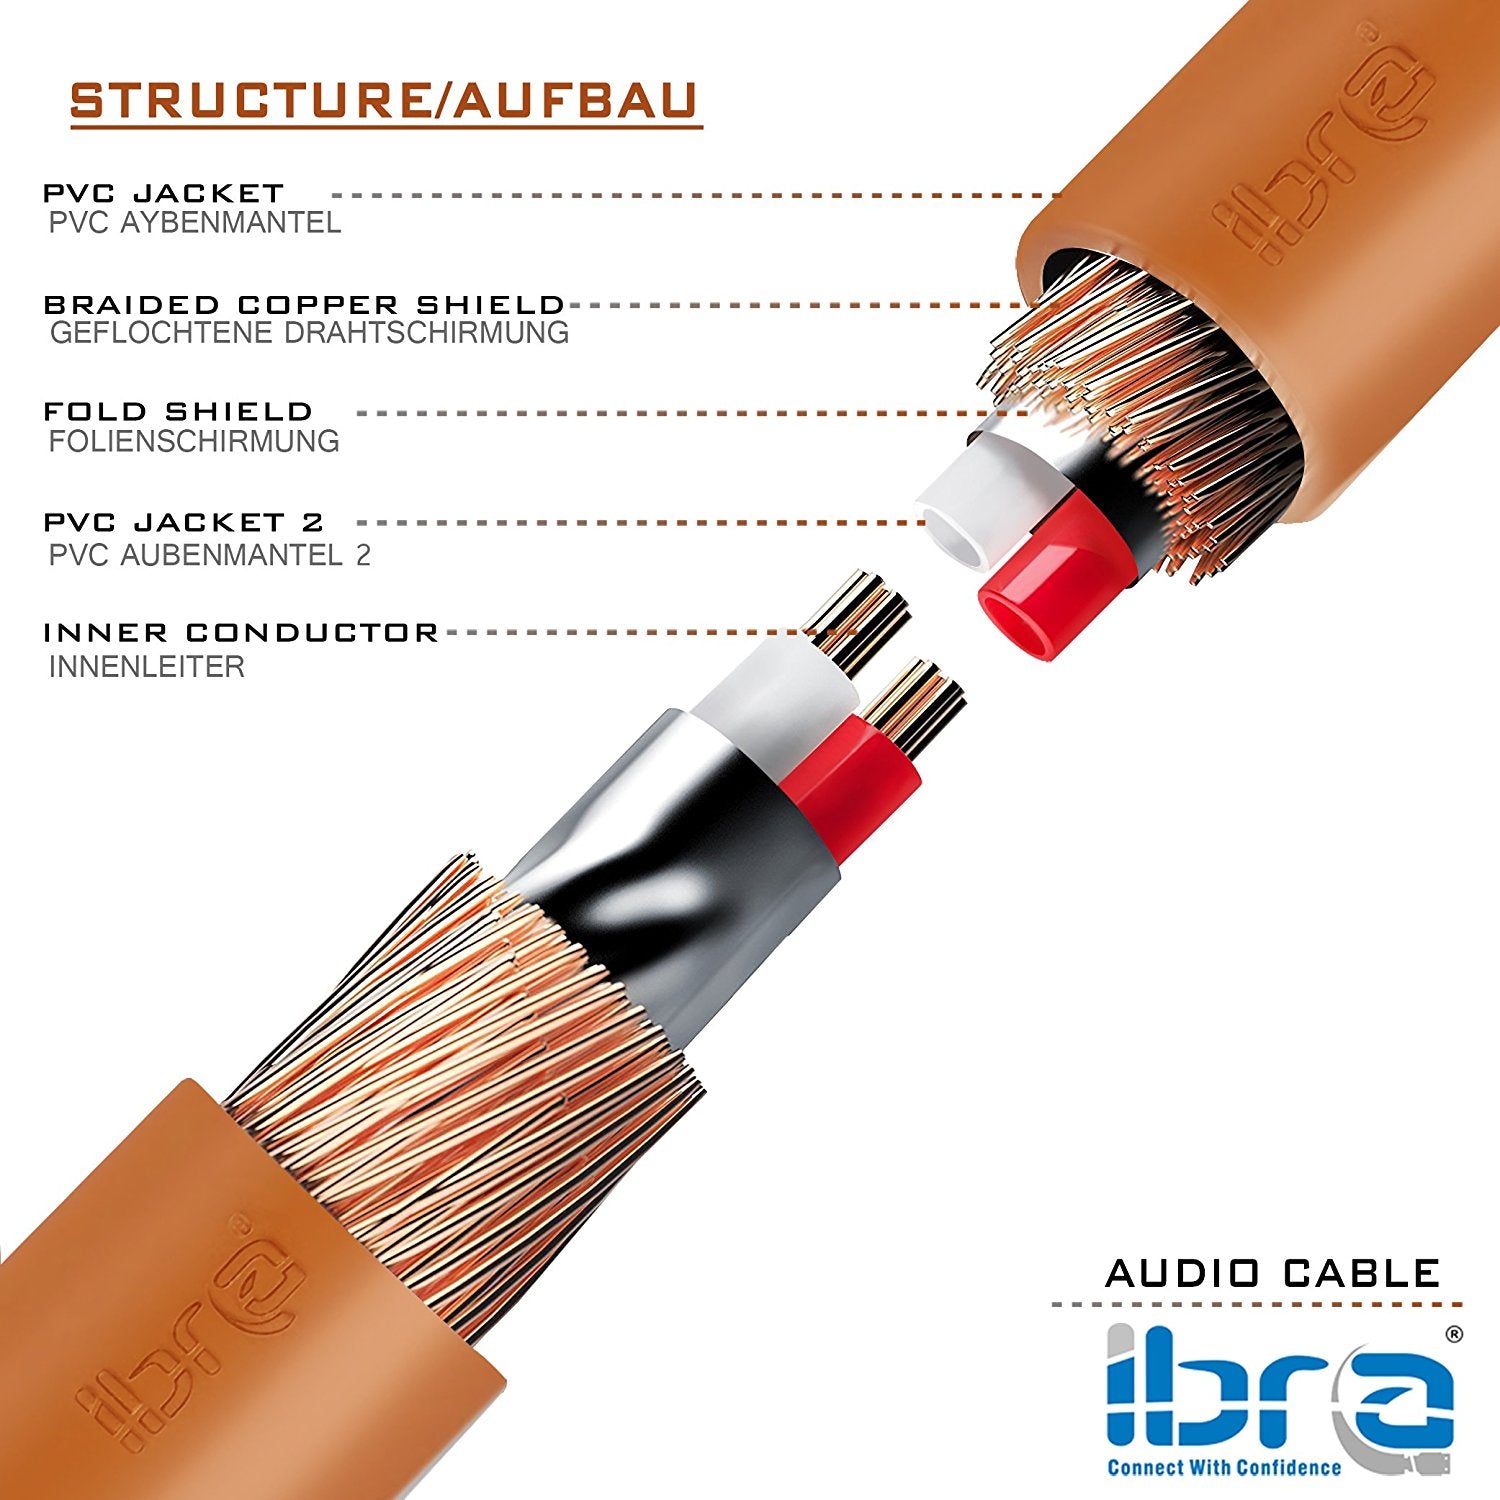 Aux Cable 3M 3.5mm Stereo Pro Auxiliary Audio Cable - for Beats Headphones Apple iPod iPhone iPad Samsung LG Smartphone MP3 Player Home / Car etc - IBRA Orange